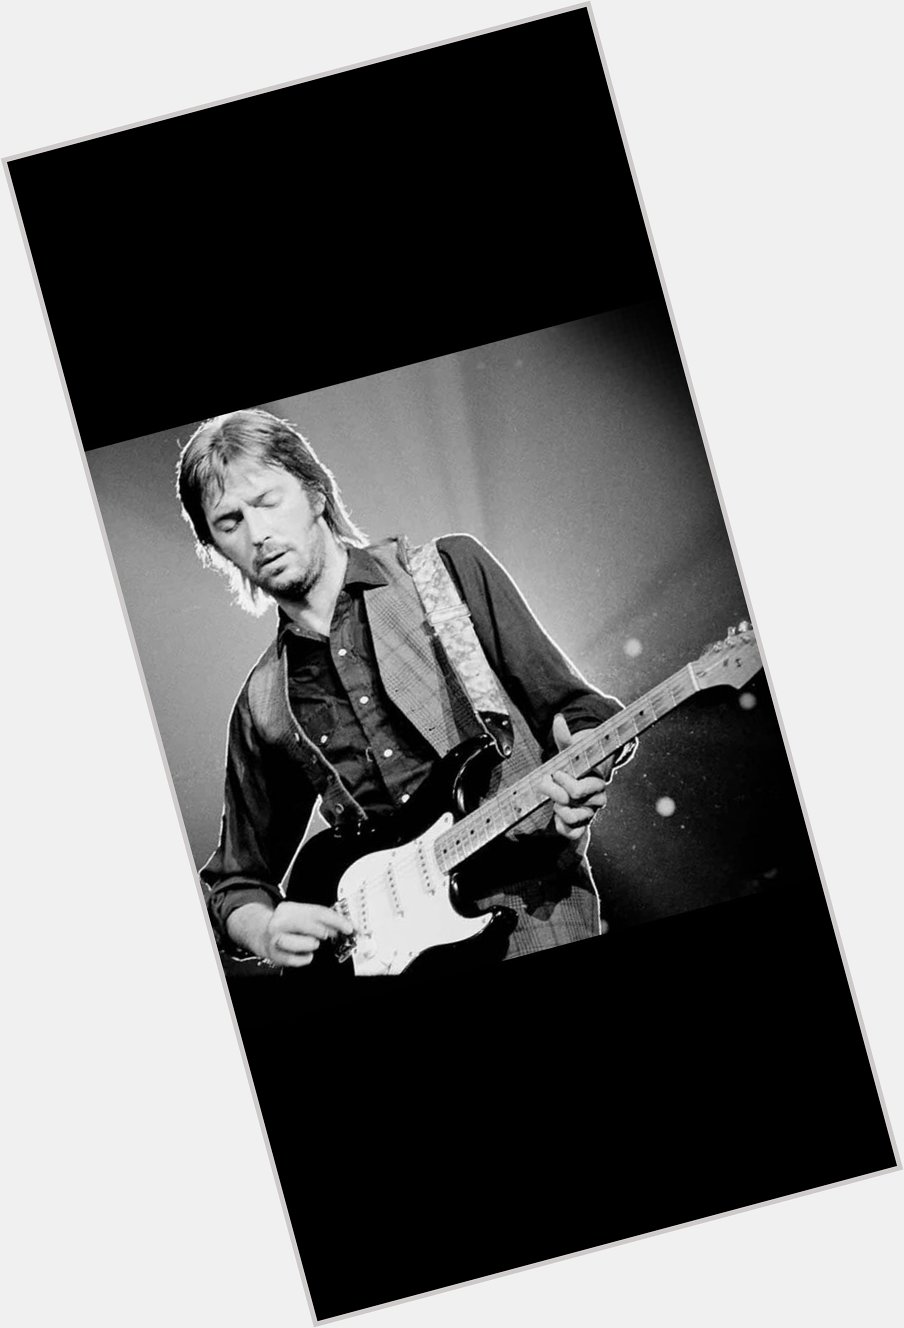 Happy birthday Eric clapton!
76years old.
Clapton is God! Blues Master! 